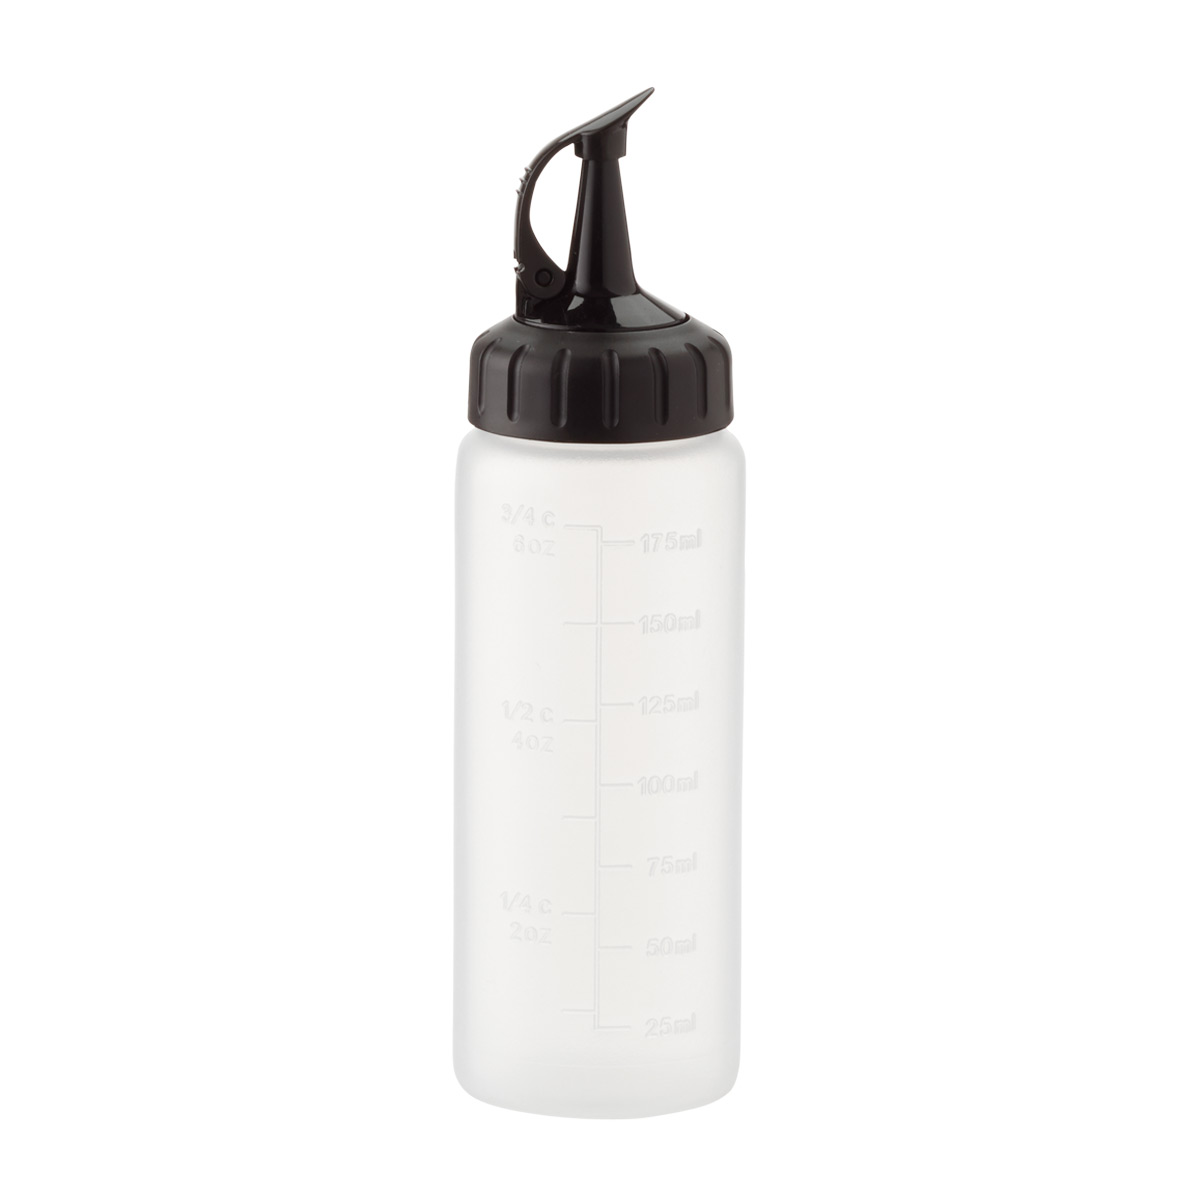 https://www.containerstore.com/catalogimages/330100/10073569-chefs-squeeze-bottle-small.jpg